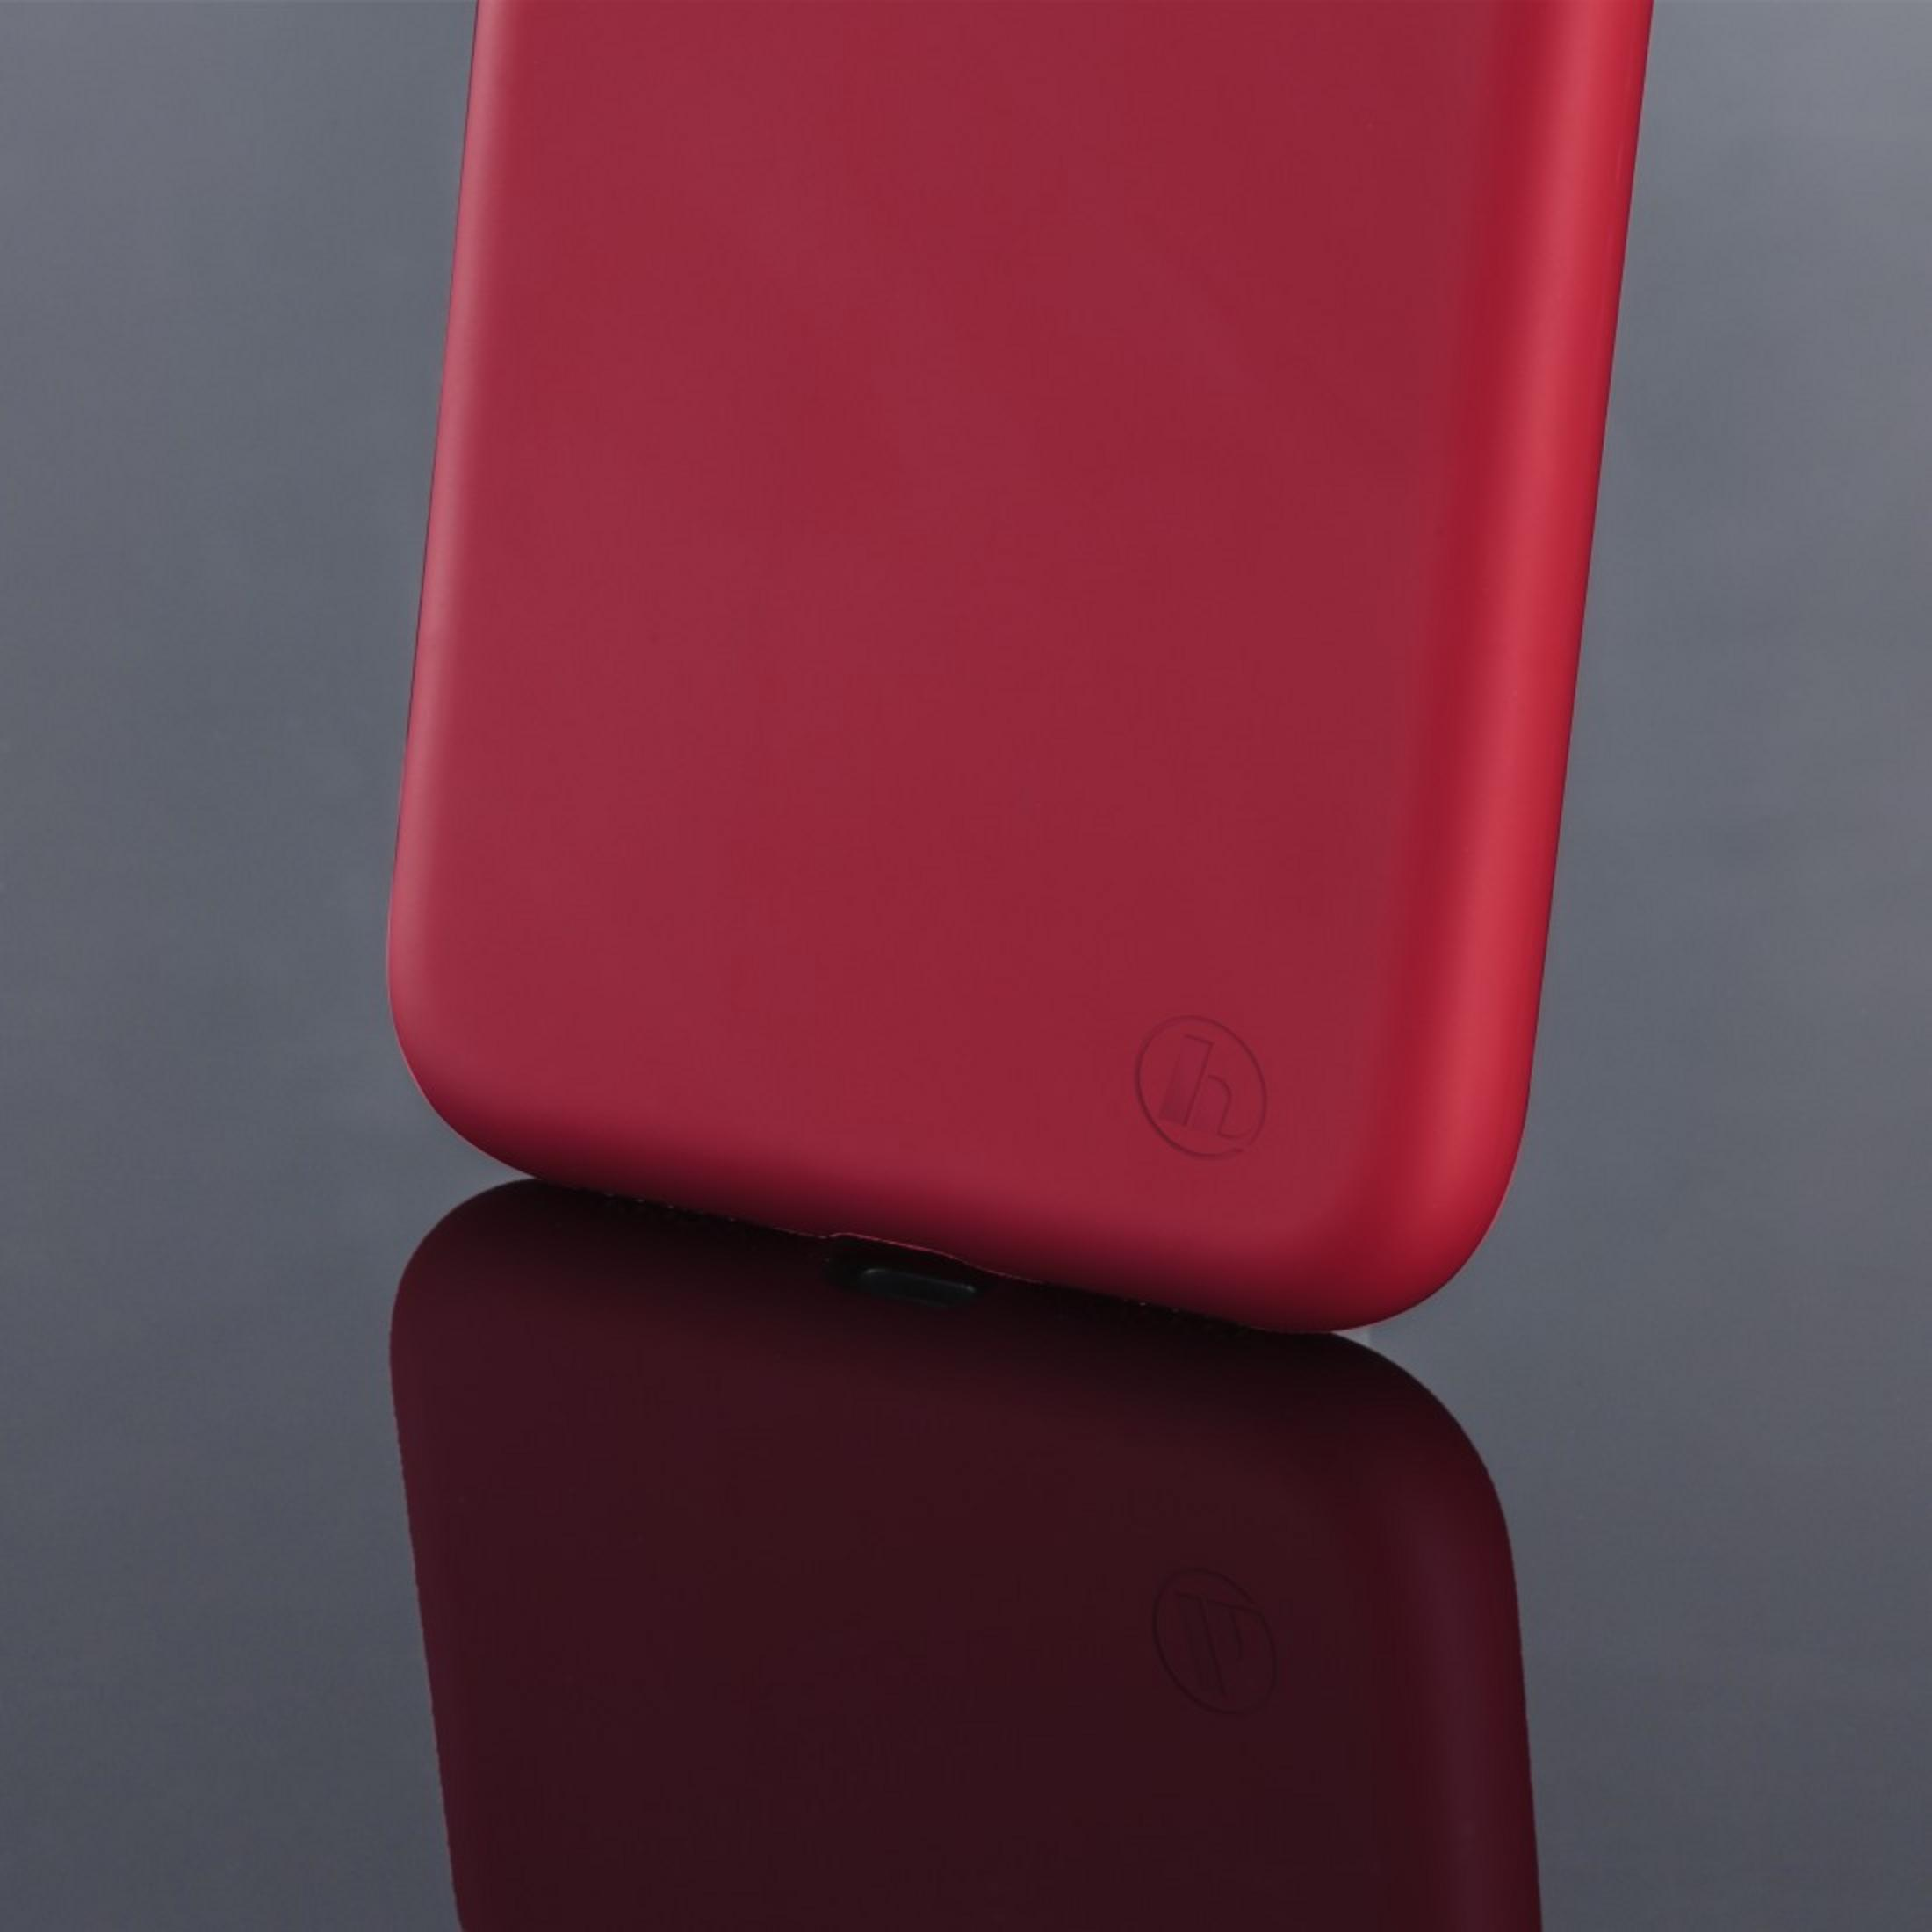 Apple, Backcover, Feel, Pro, 12/12 Finest Rot iPhone HAMA